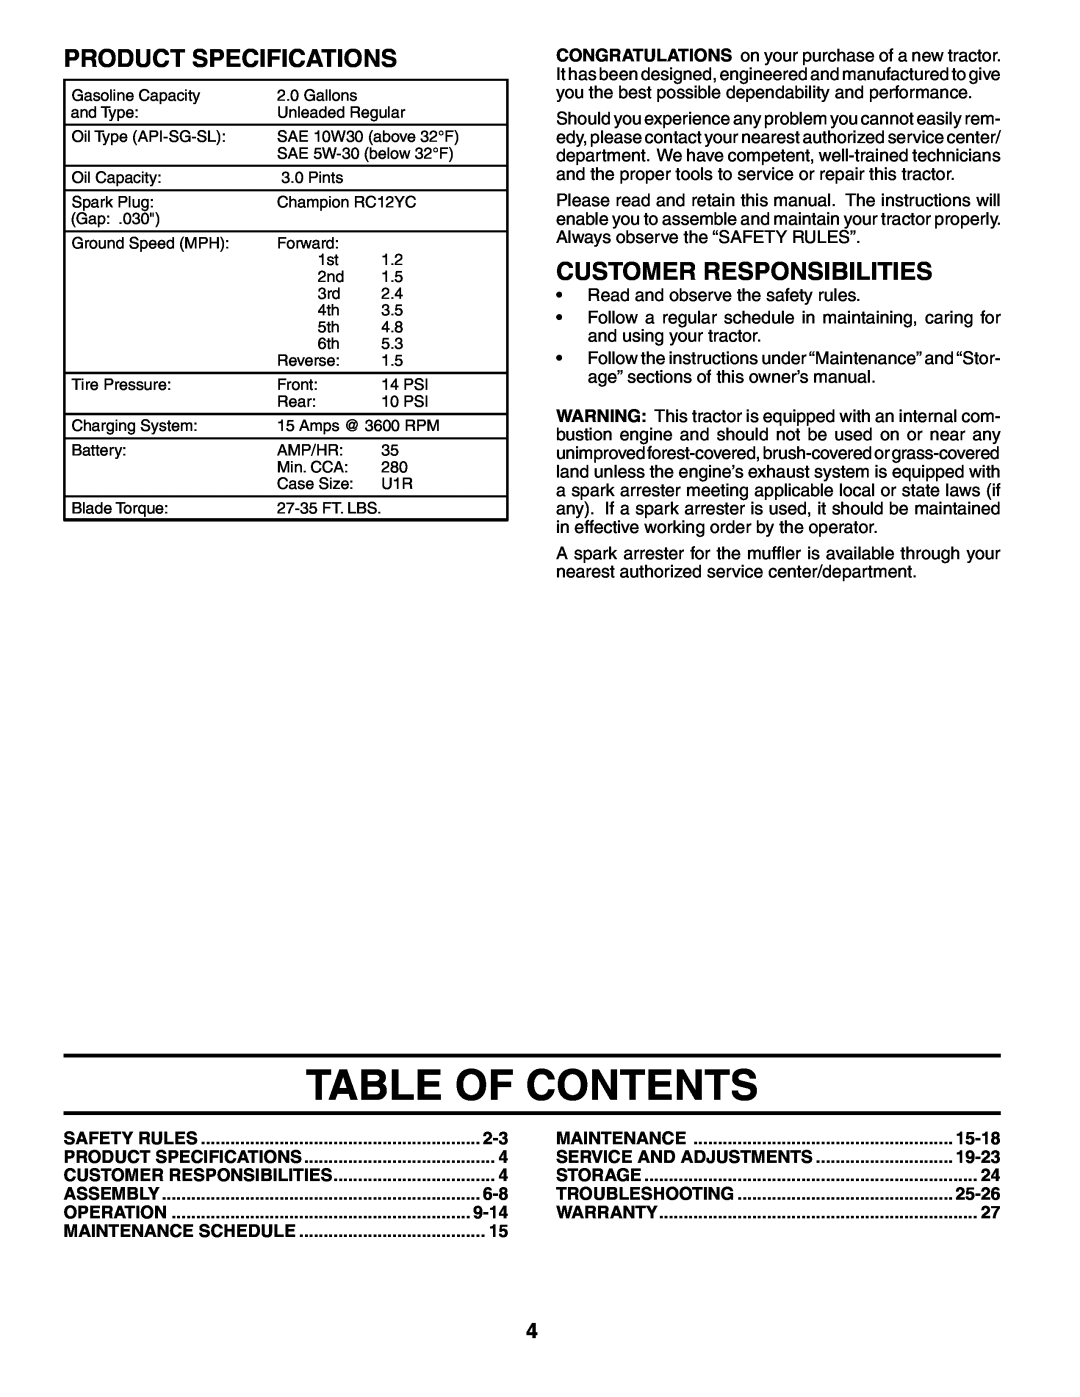 Poulan PK1942YT manual Table Of Contents, Product Specifications, Customer Responsibilities, 9-14, 15-18, 19-23, 25-26 